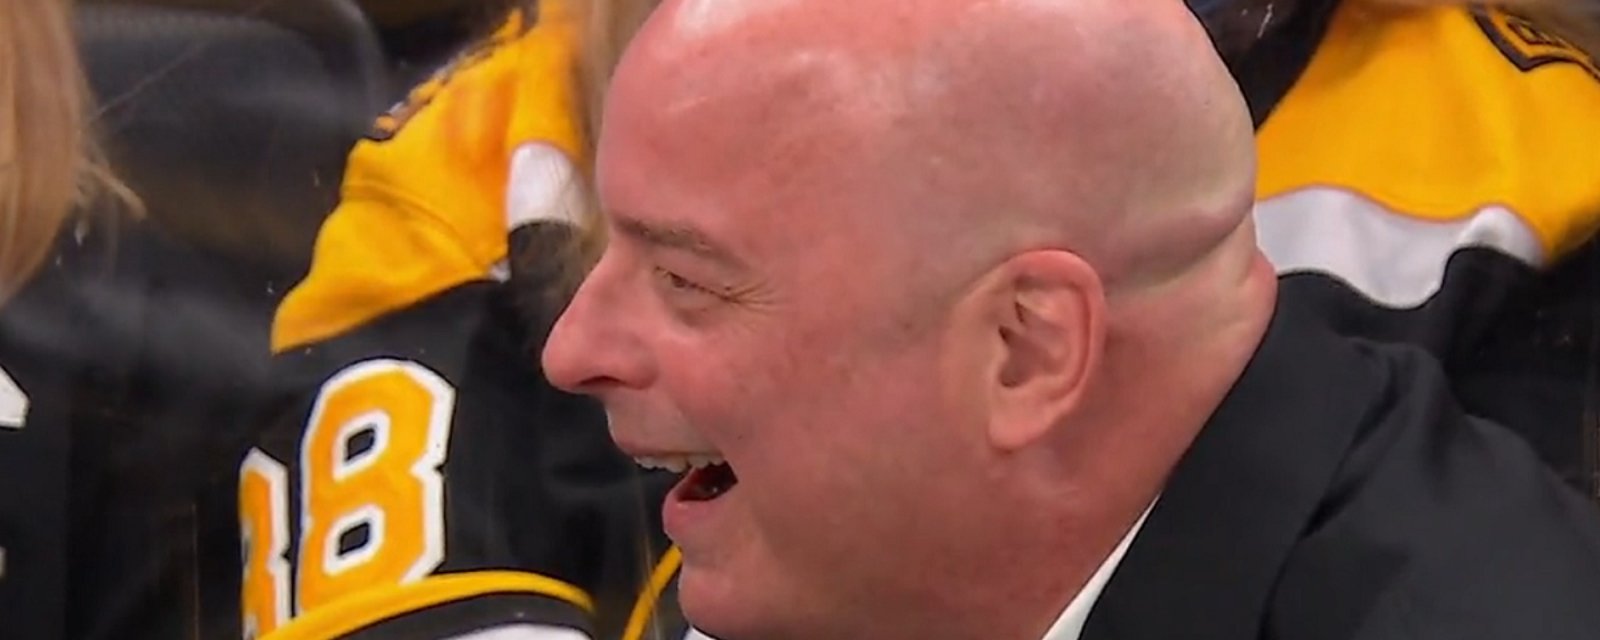 Jim Montgomery loses his mind over officiating in Game 3.